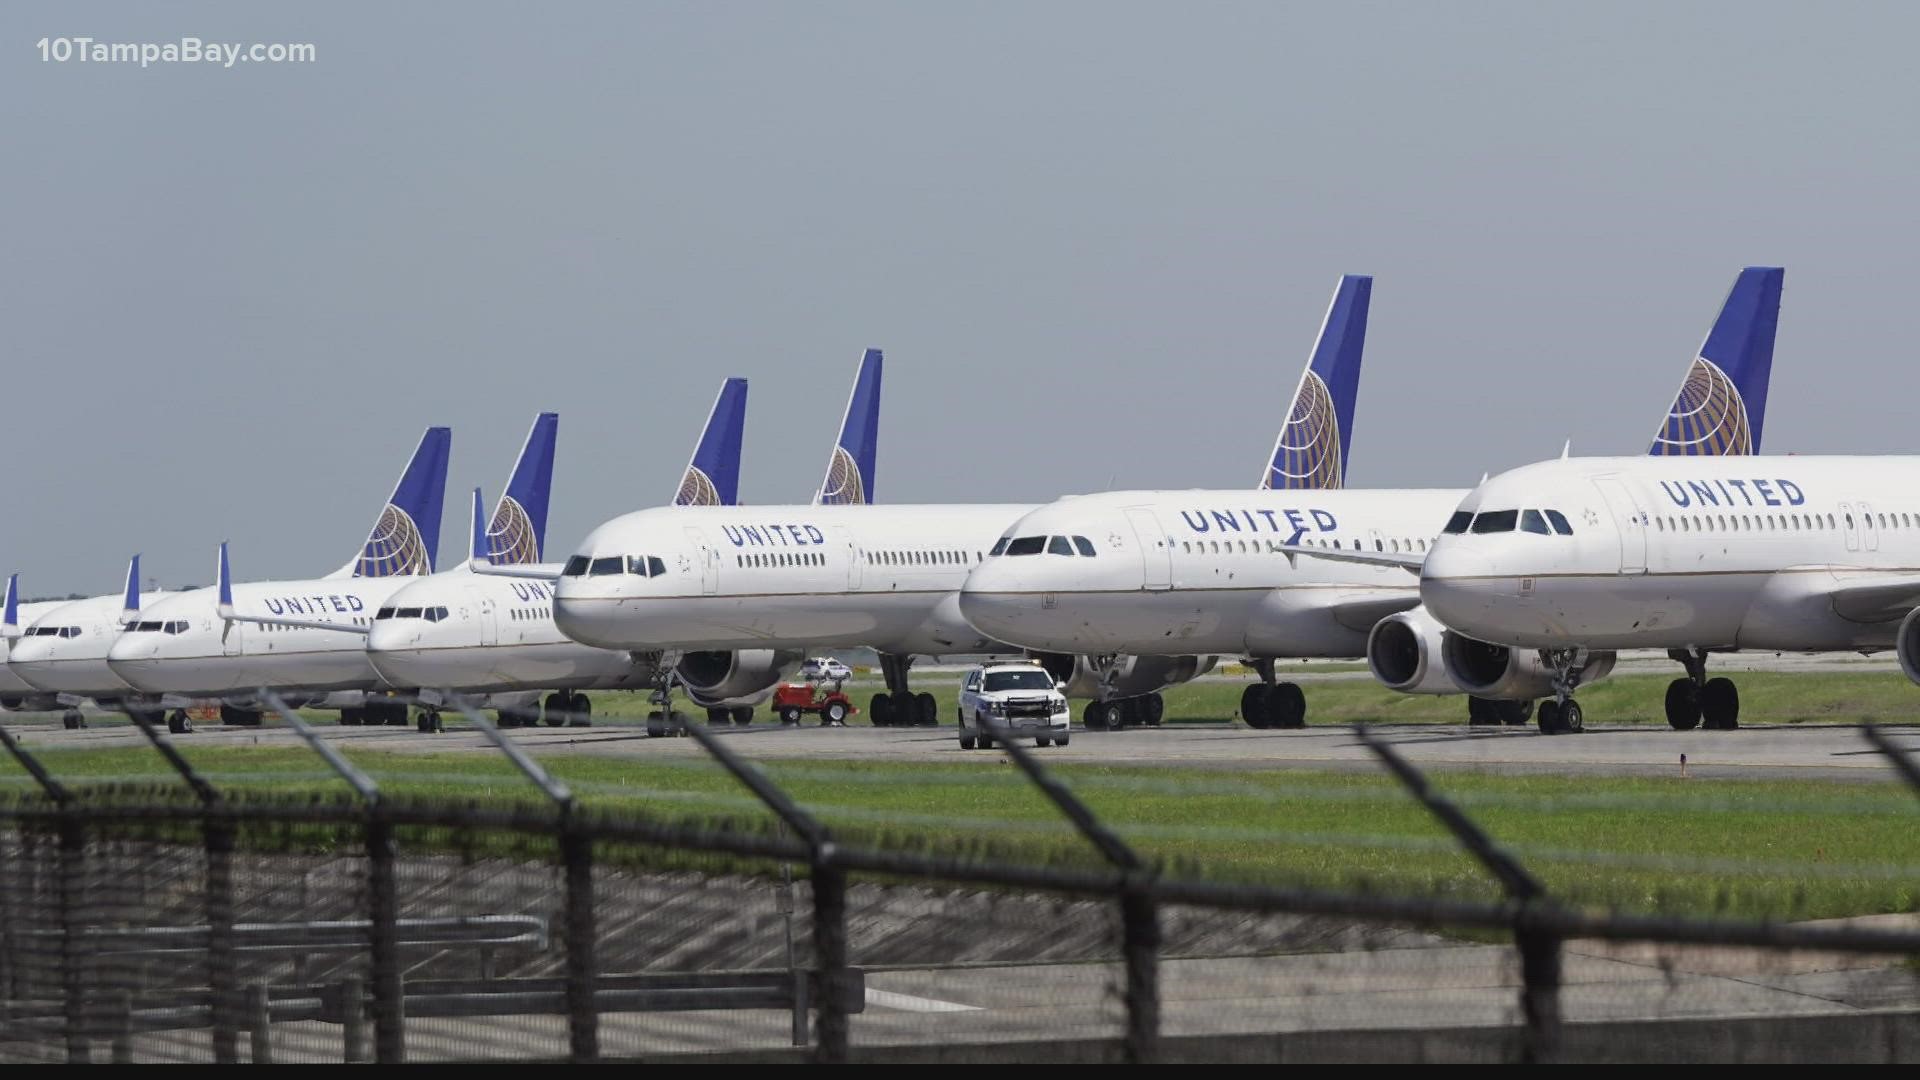 United CEO says it's clear — that everyone is safer when everyone is vaccinated.